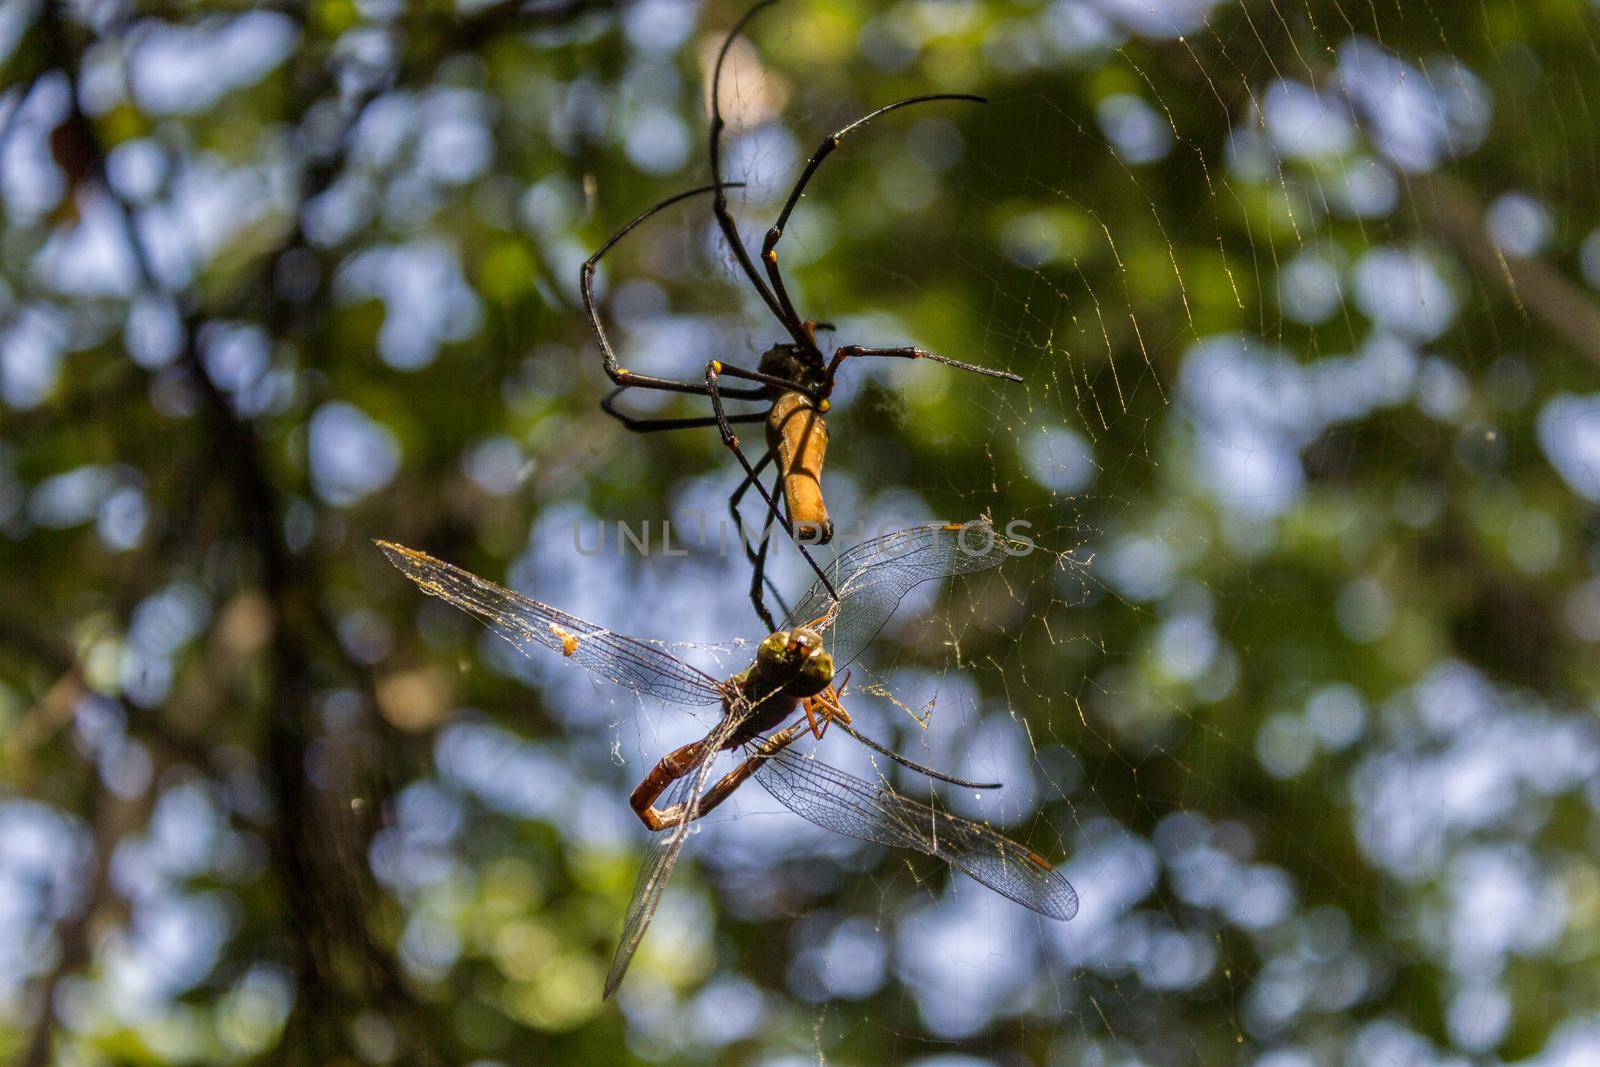 A large northern golden orb weaver or giant golden orb weaver spider Nephila pilipes typically found in Asia and Australia. It is a species of spider known for spinning intricate and beautiful web.